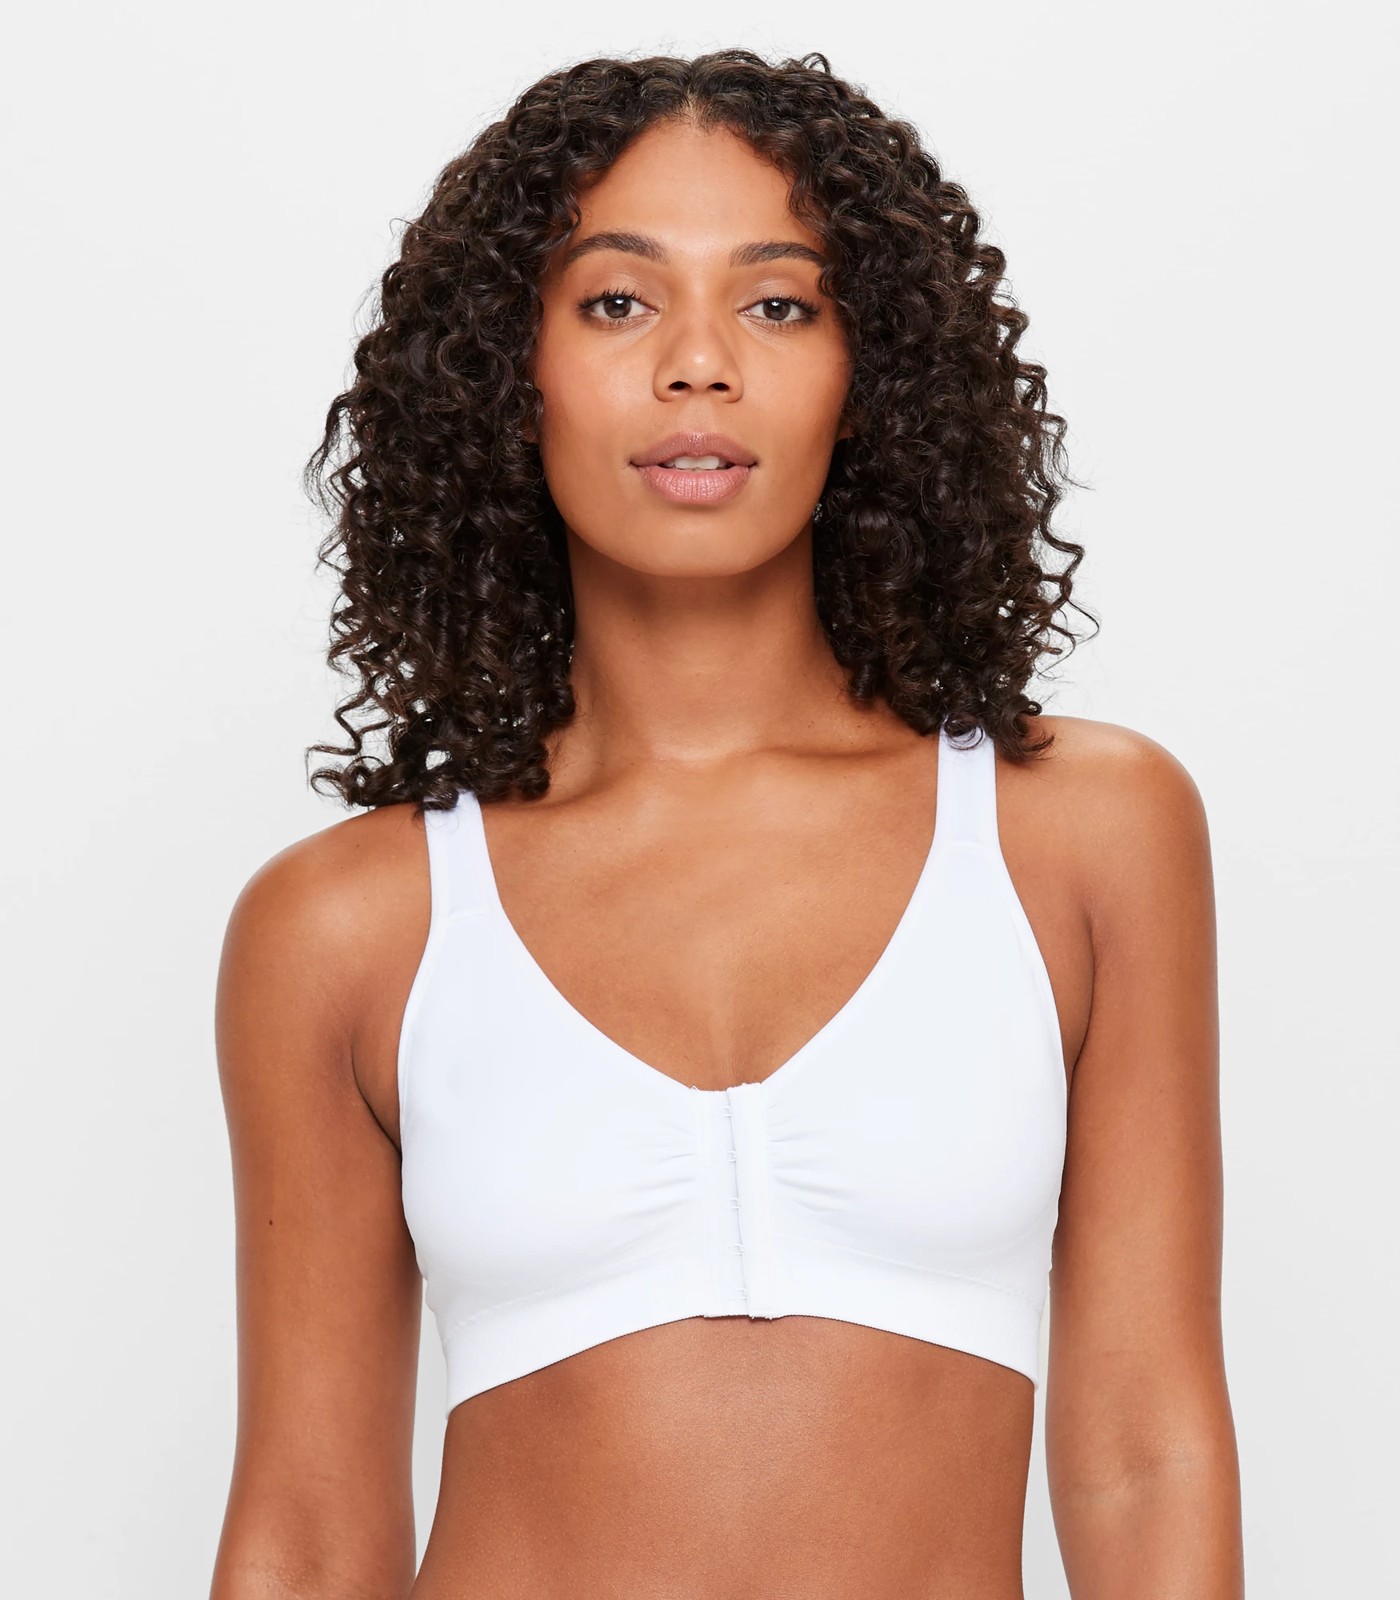 Looking for Post Surgical Support? – SportsBra